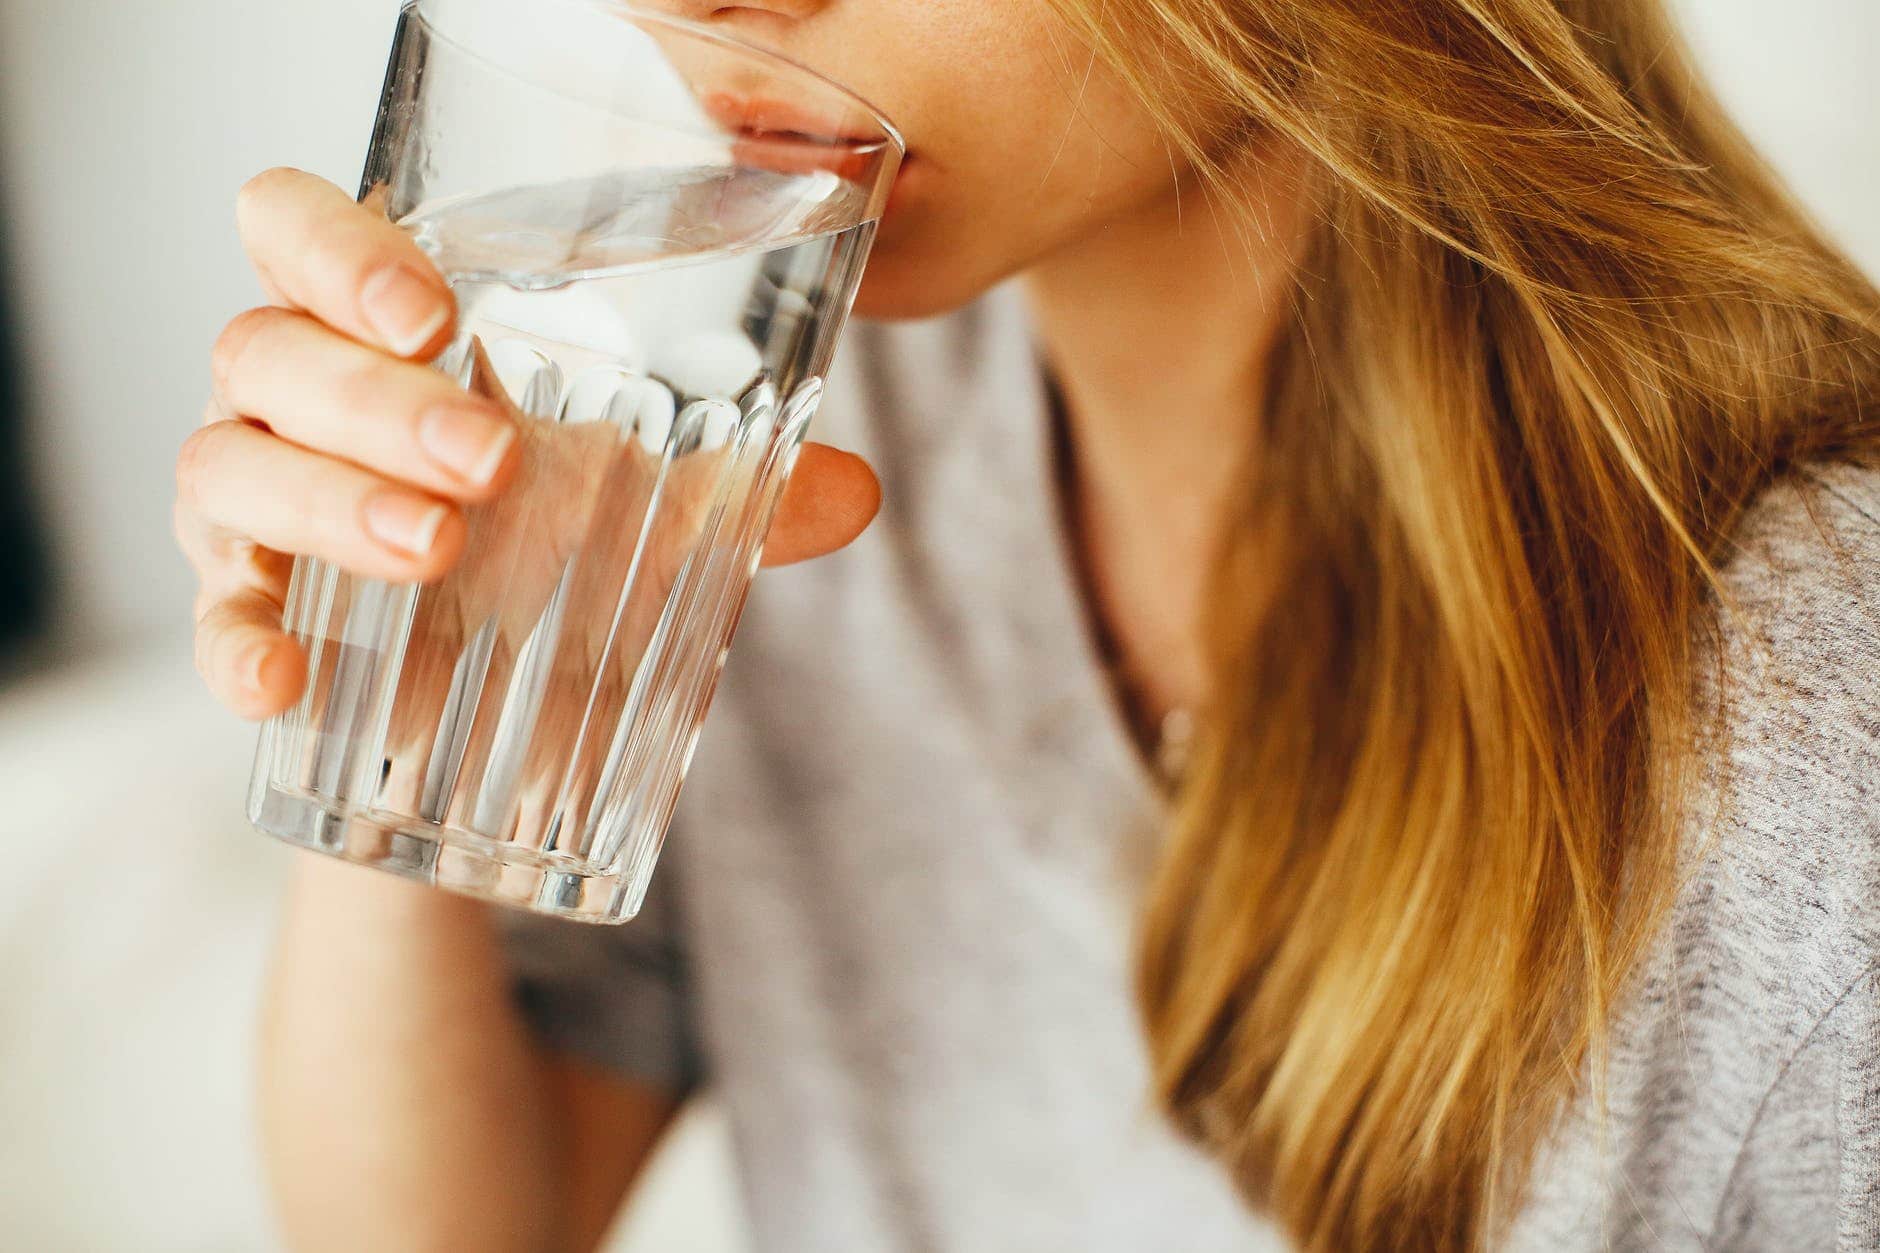 Woman taking a sip from a glass of water